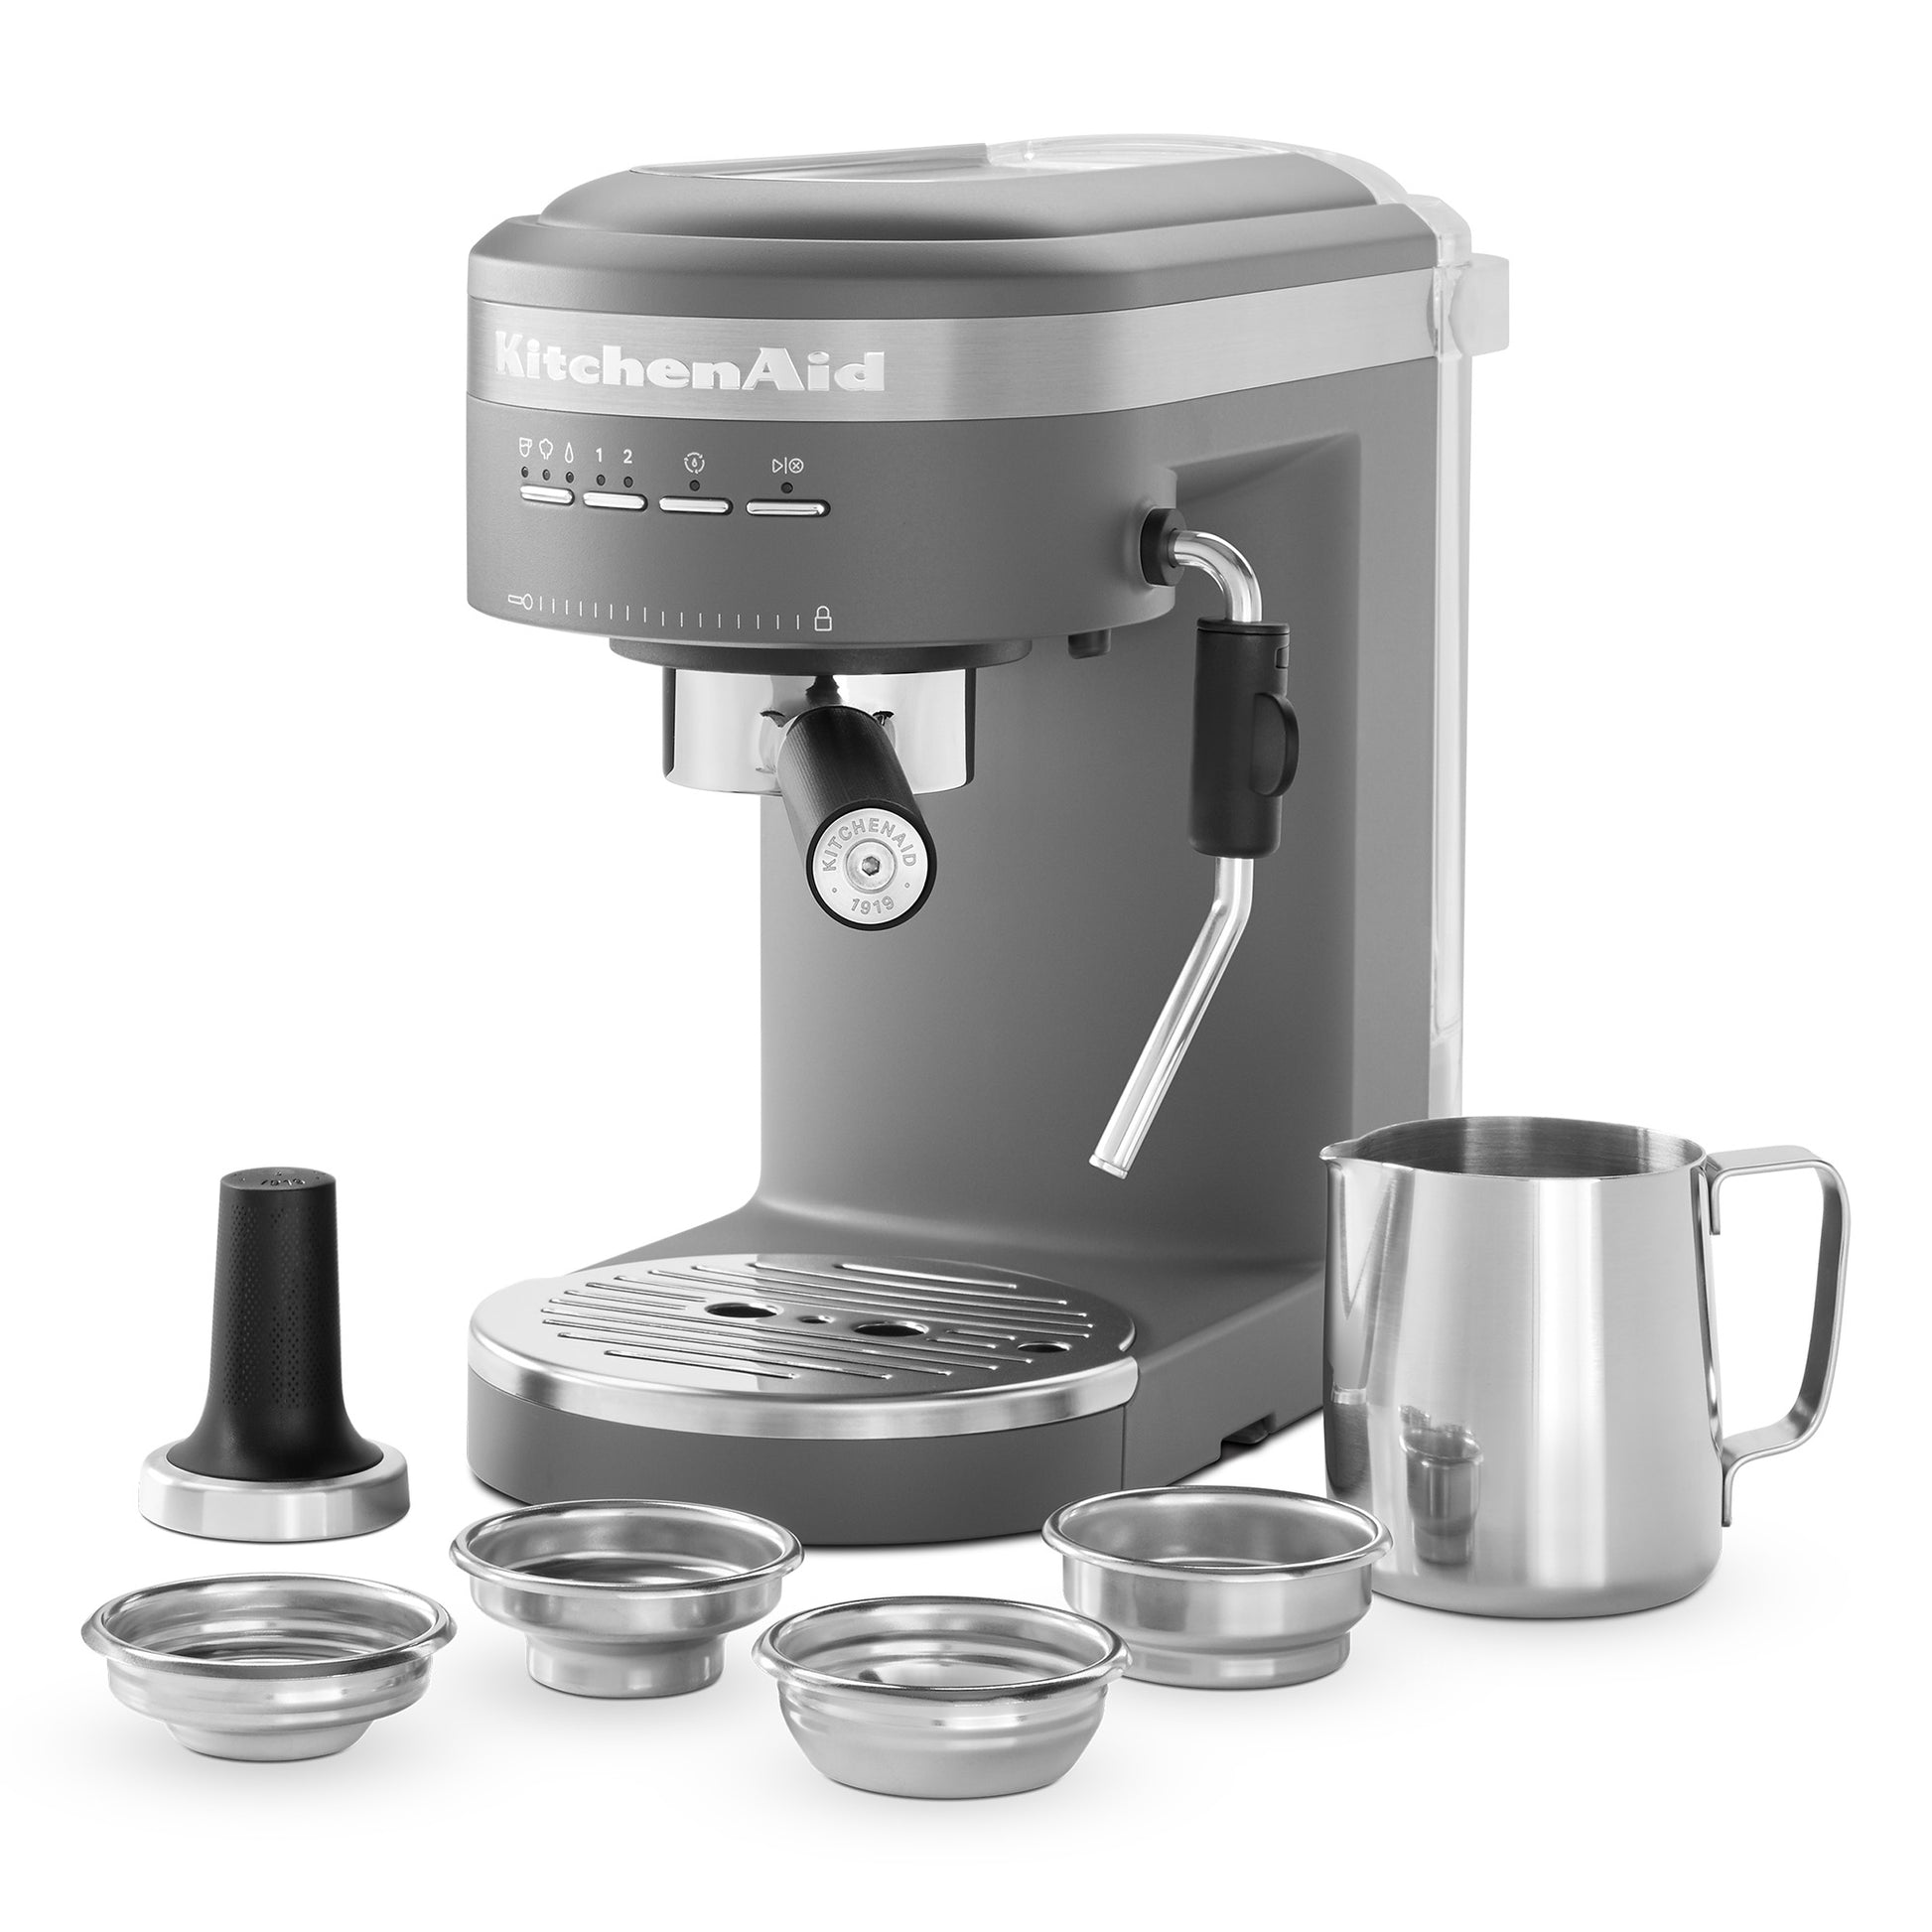 KitchenAid Milk Frother Attachment, Matte Charcoal Grey - New in Box